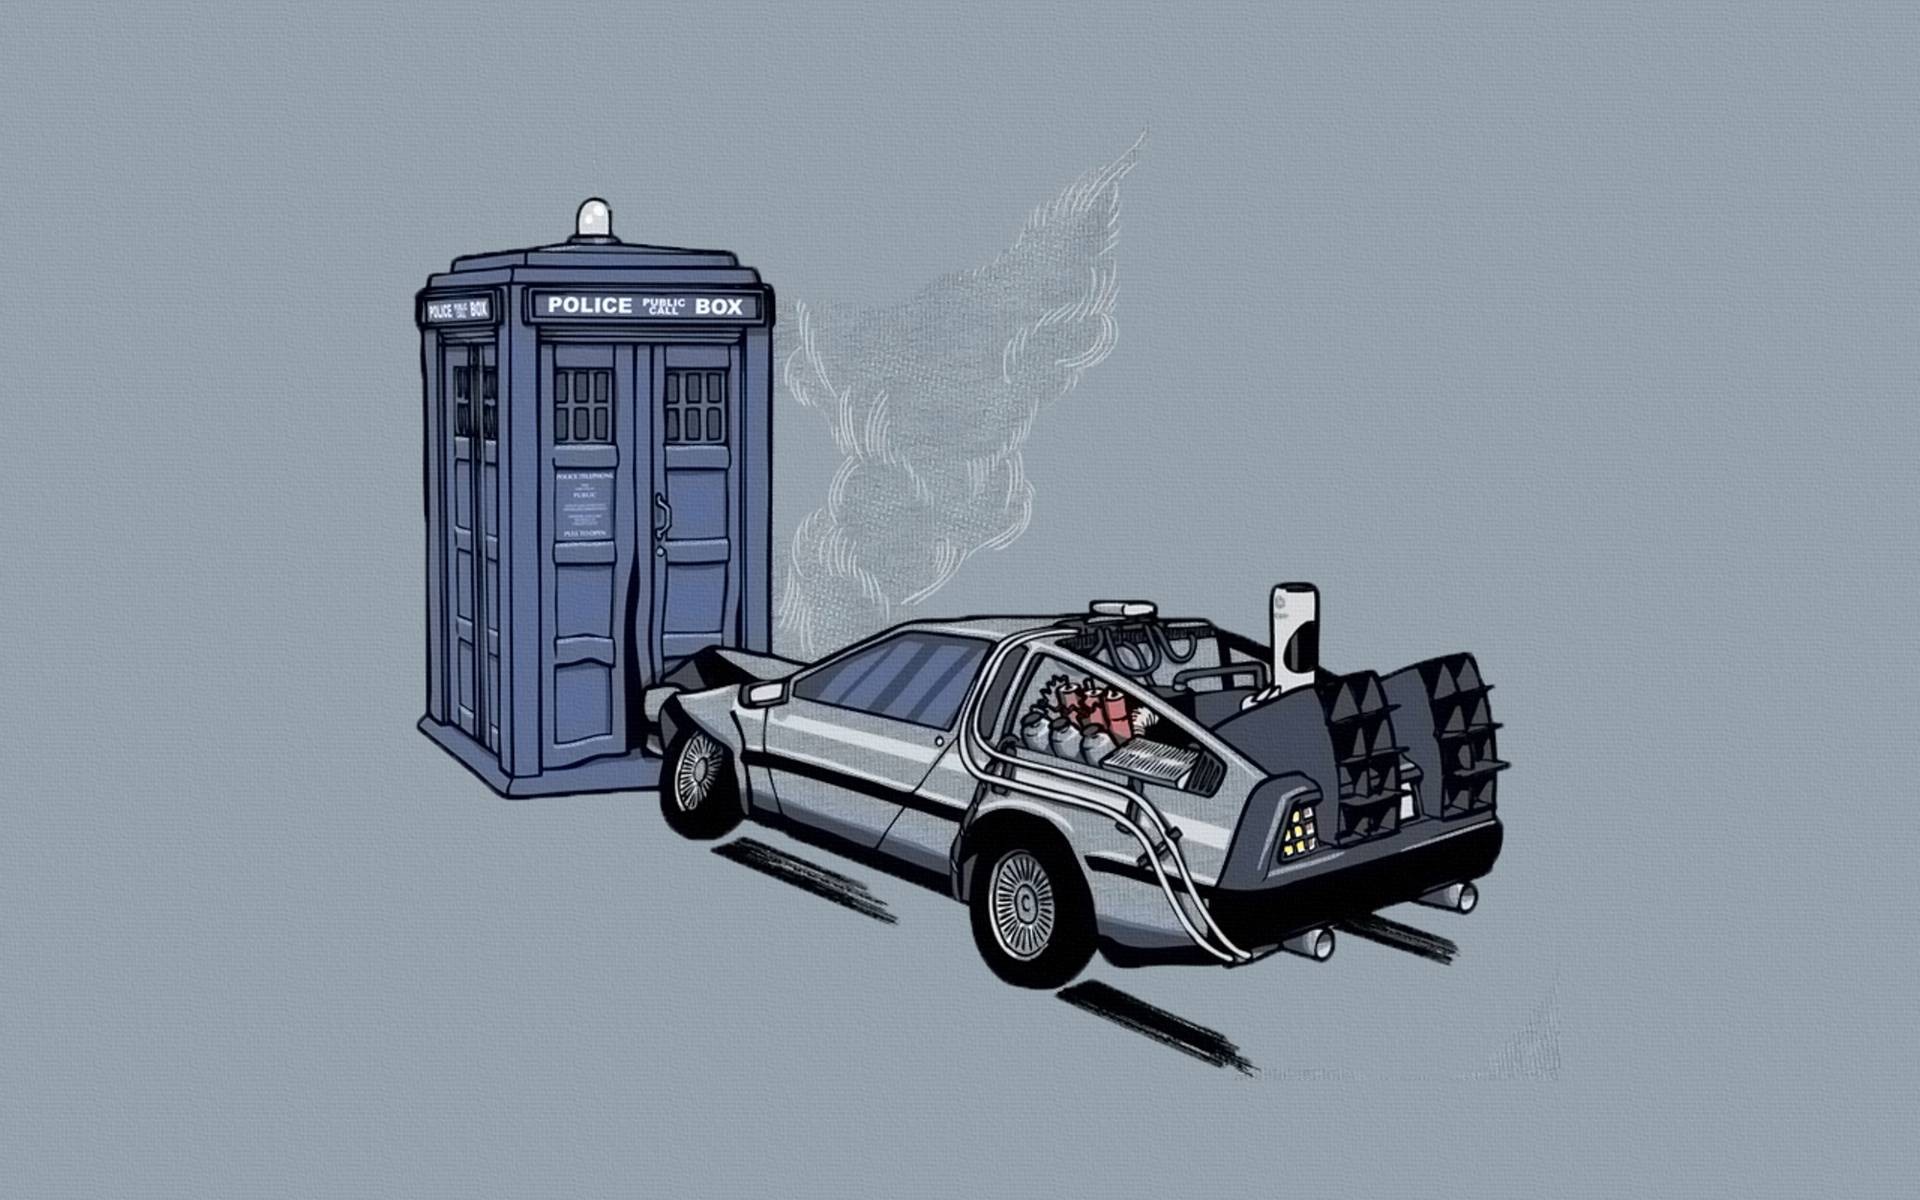 General 1920x1200 Doctor Who Back to the Future crossover Time Machine car vehicle simple background artwork science fiction TV series movies humor crash gray background gray